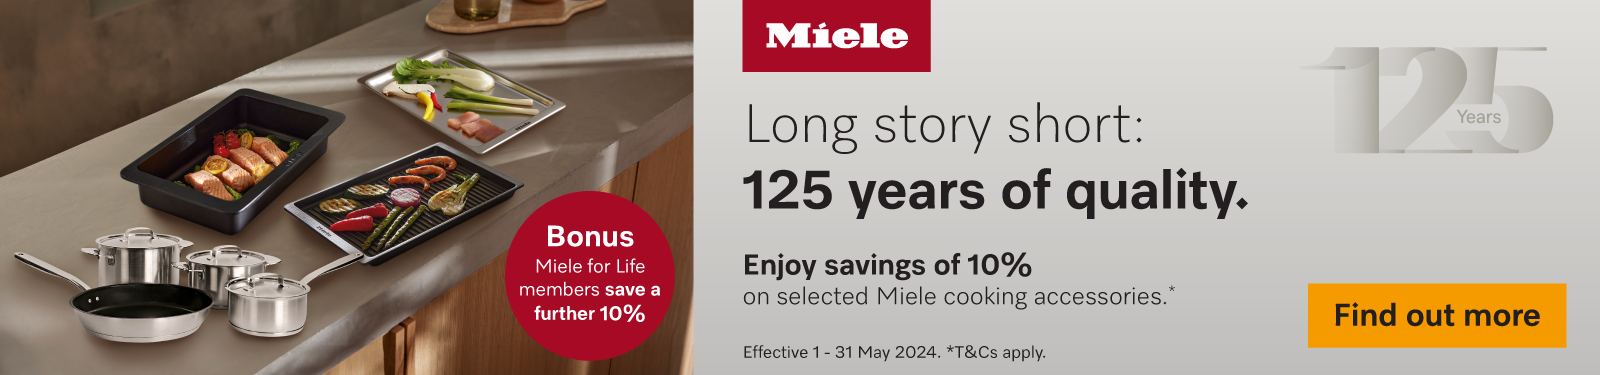 10% Off Select Miele Cooking Accessories at Retravision